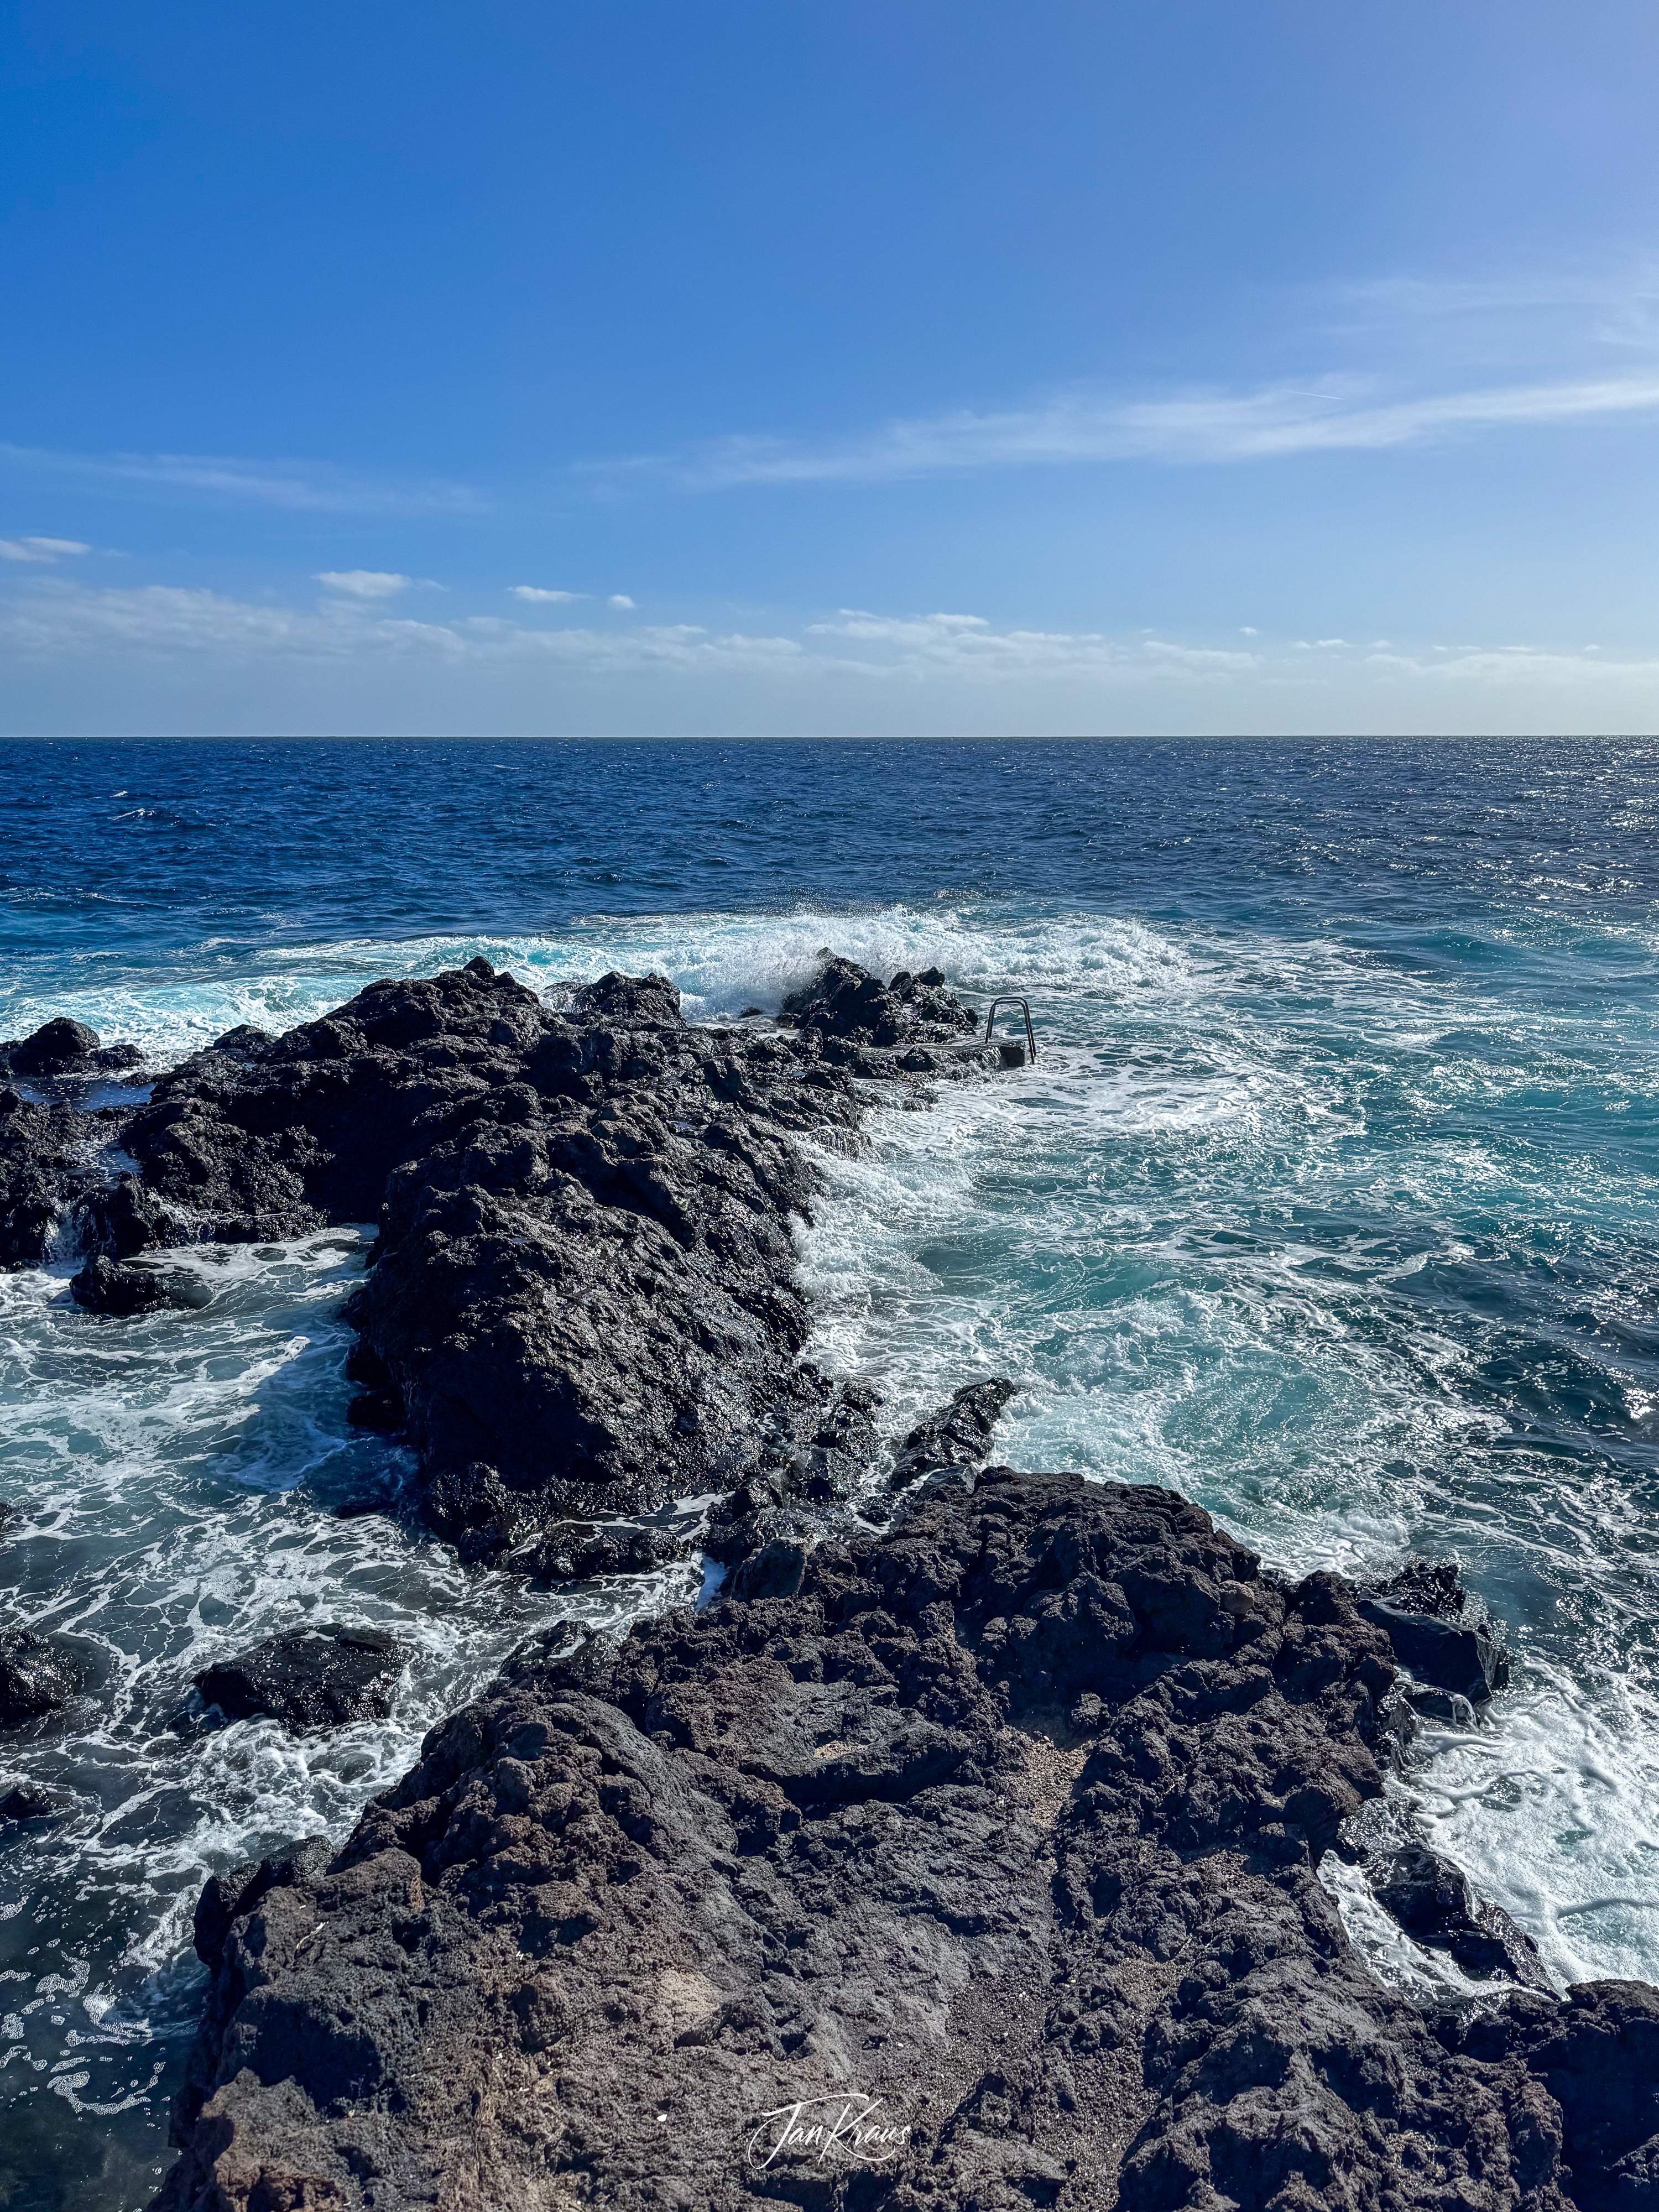 A view of the ocean from the east coast of Tenerife in El Tablado, Canary Islands, Spain